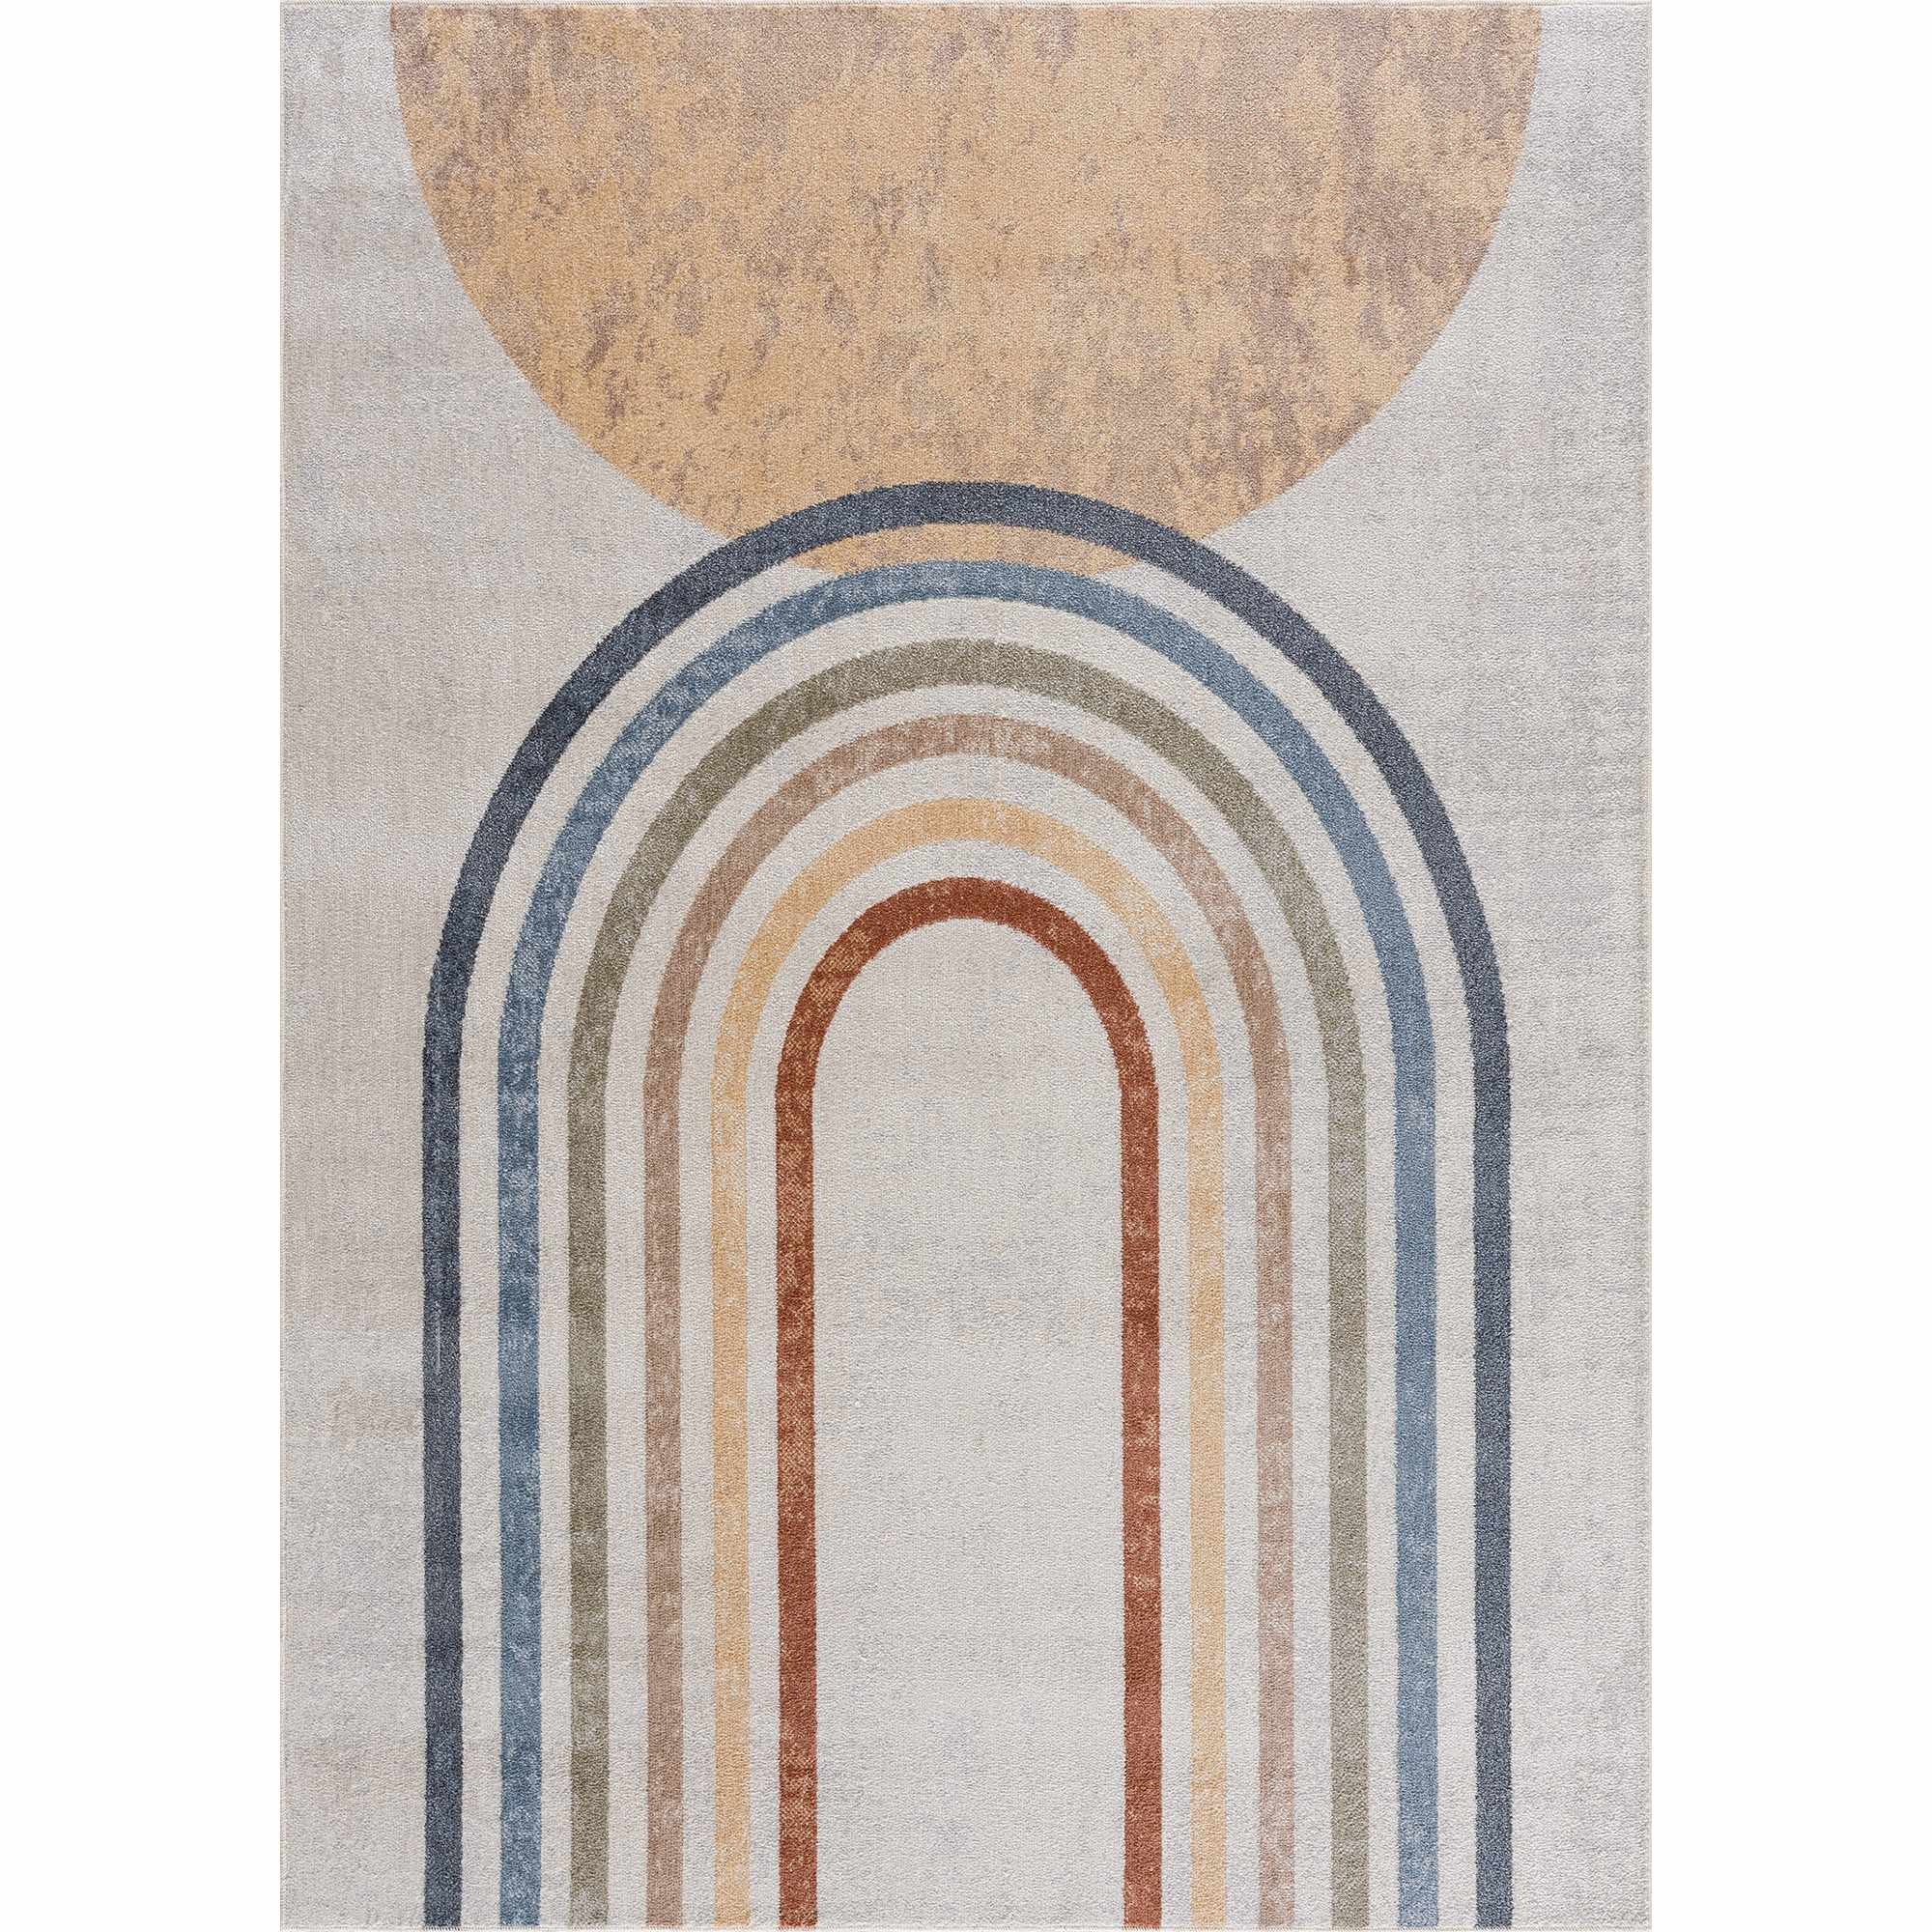 Ellyza Area Rug with Non-Slip Backing Wrought Studio Rug Size: Square 5